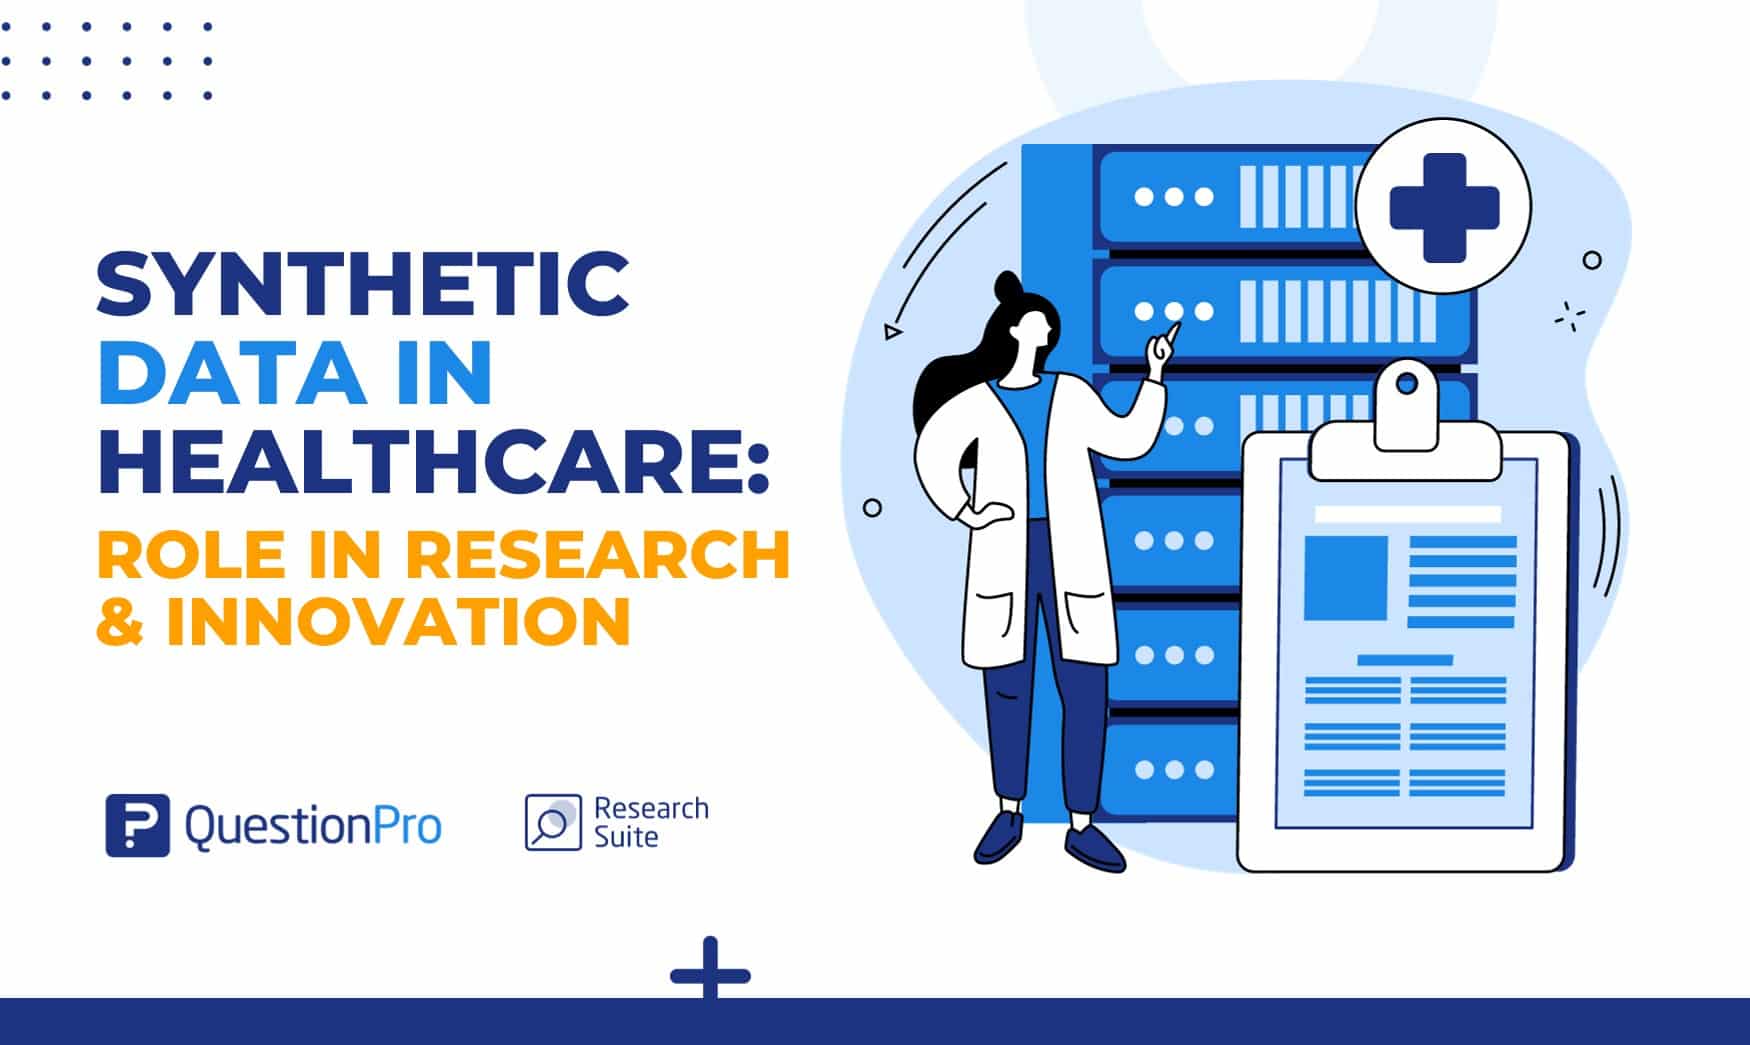 Discover how synthetic data in healthcare is transforming research and innovation. Explore the needs, creating techniques, and usage.